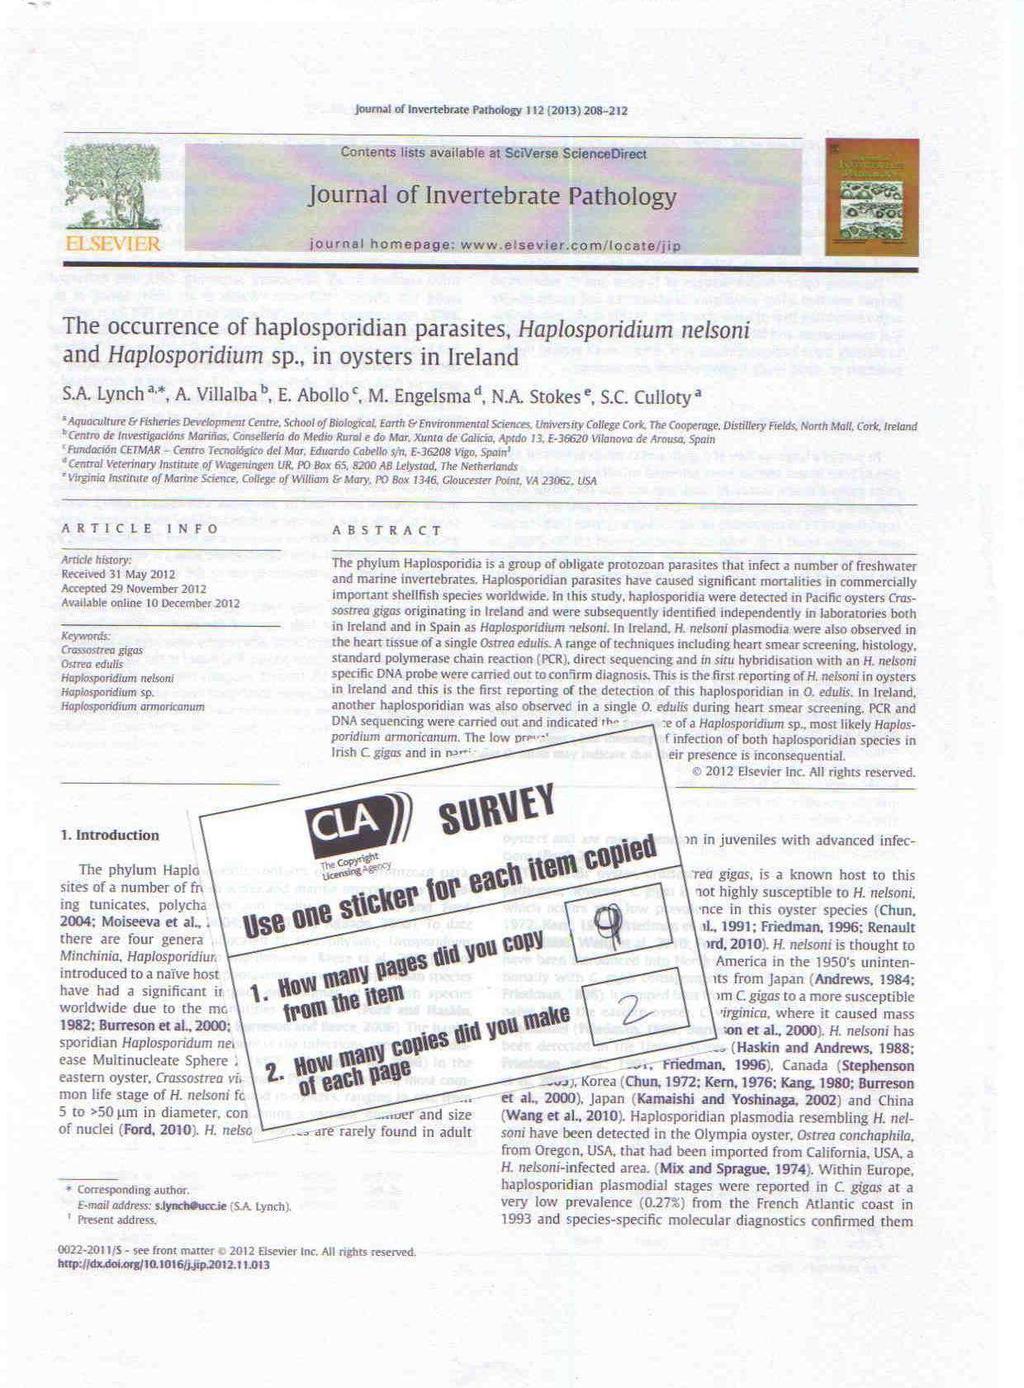 Identifier Page + Data Label, without ISSN and when photocopying from a printout of a digital original* (journal/periodical)